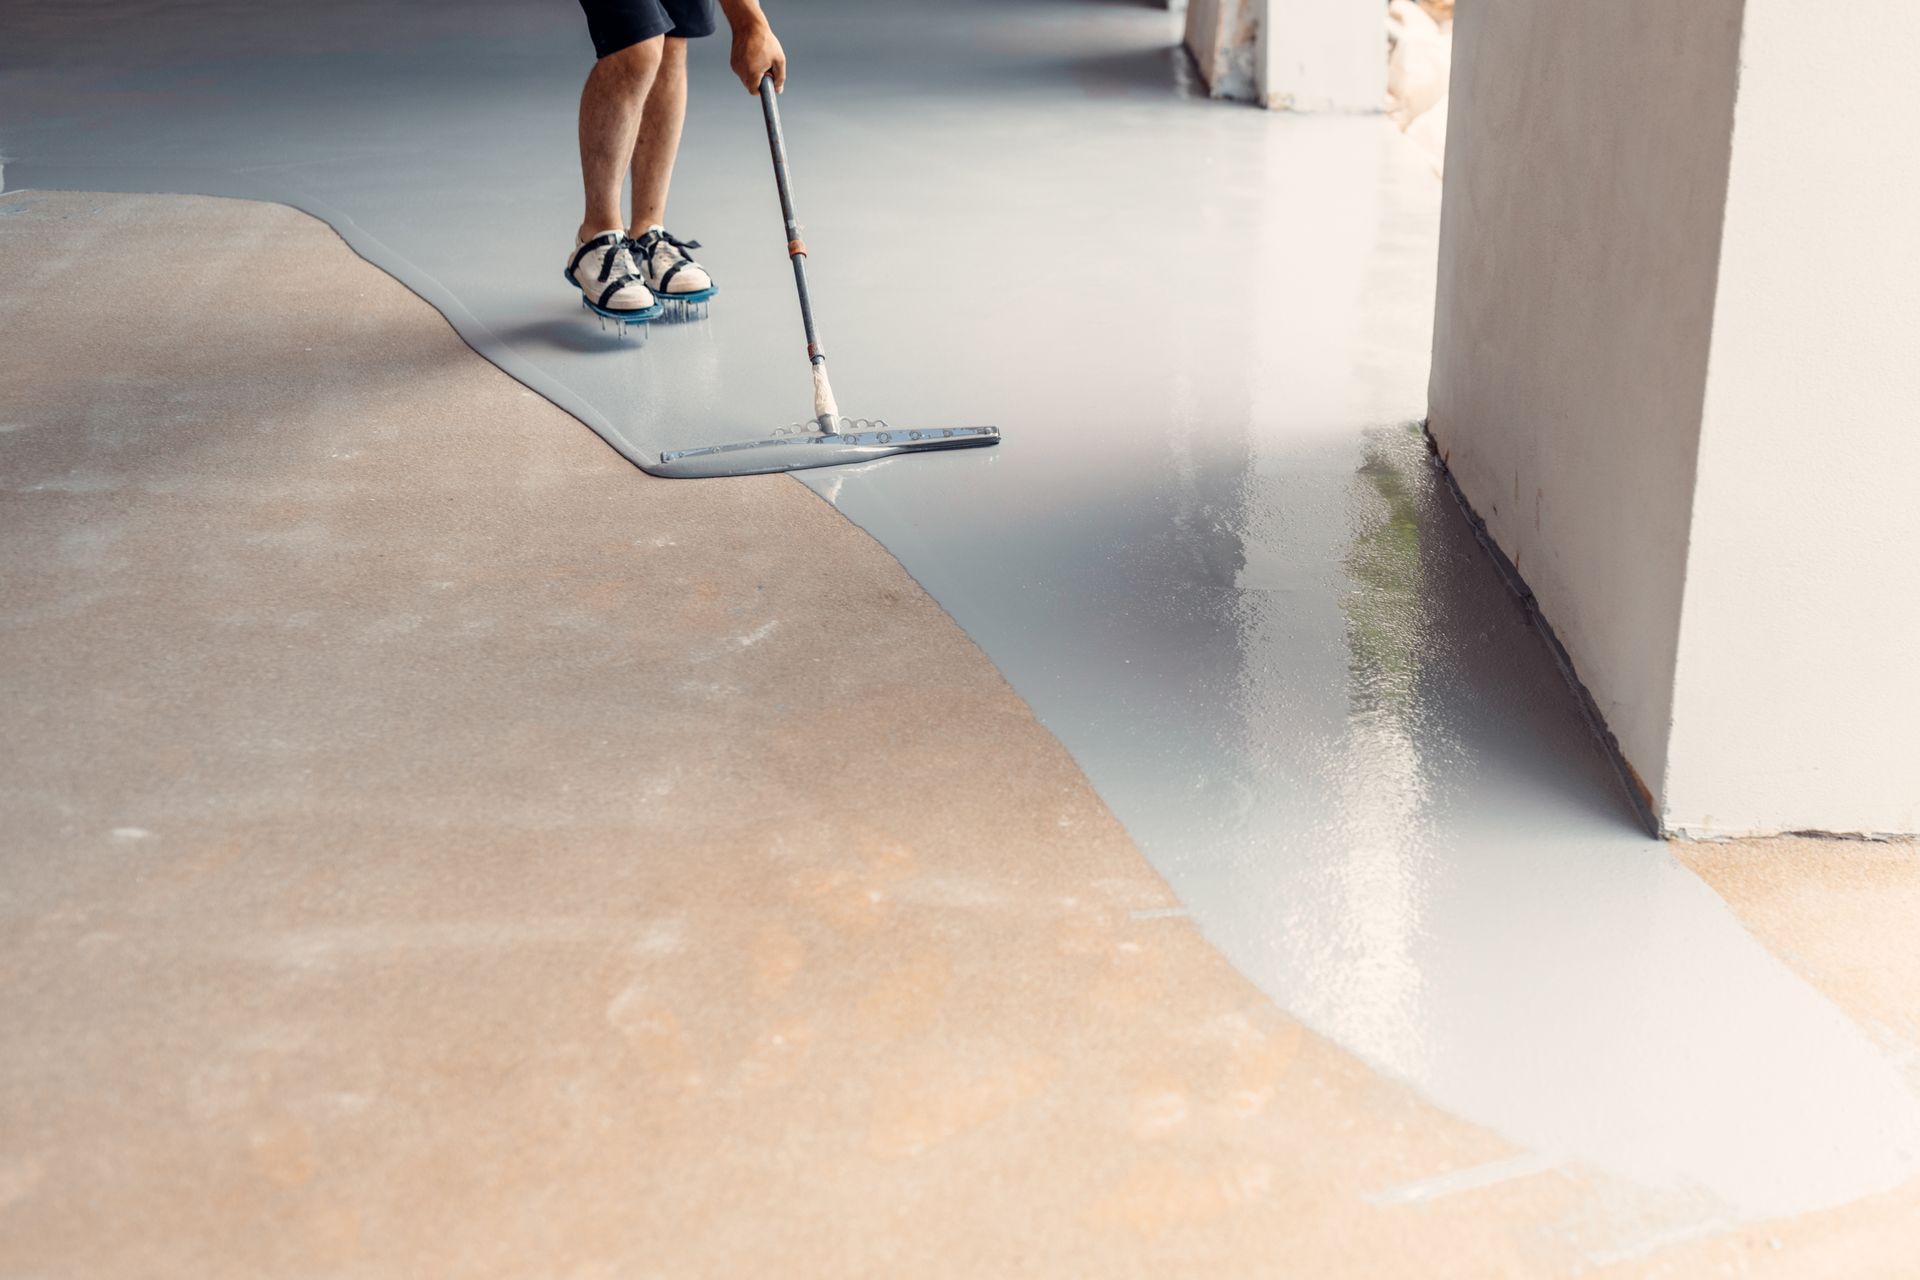 A person is painting a concrete floor with a mop.